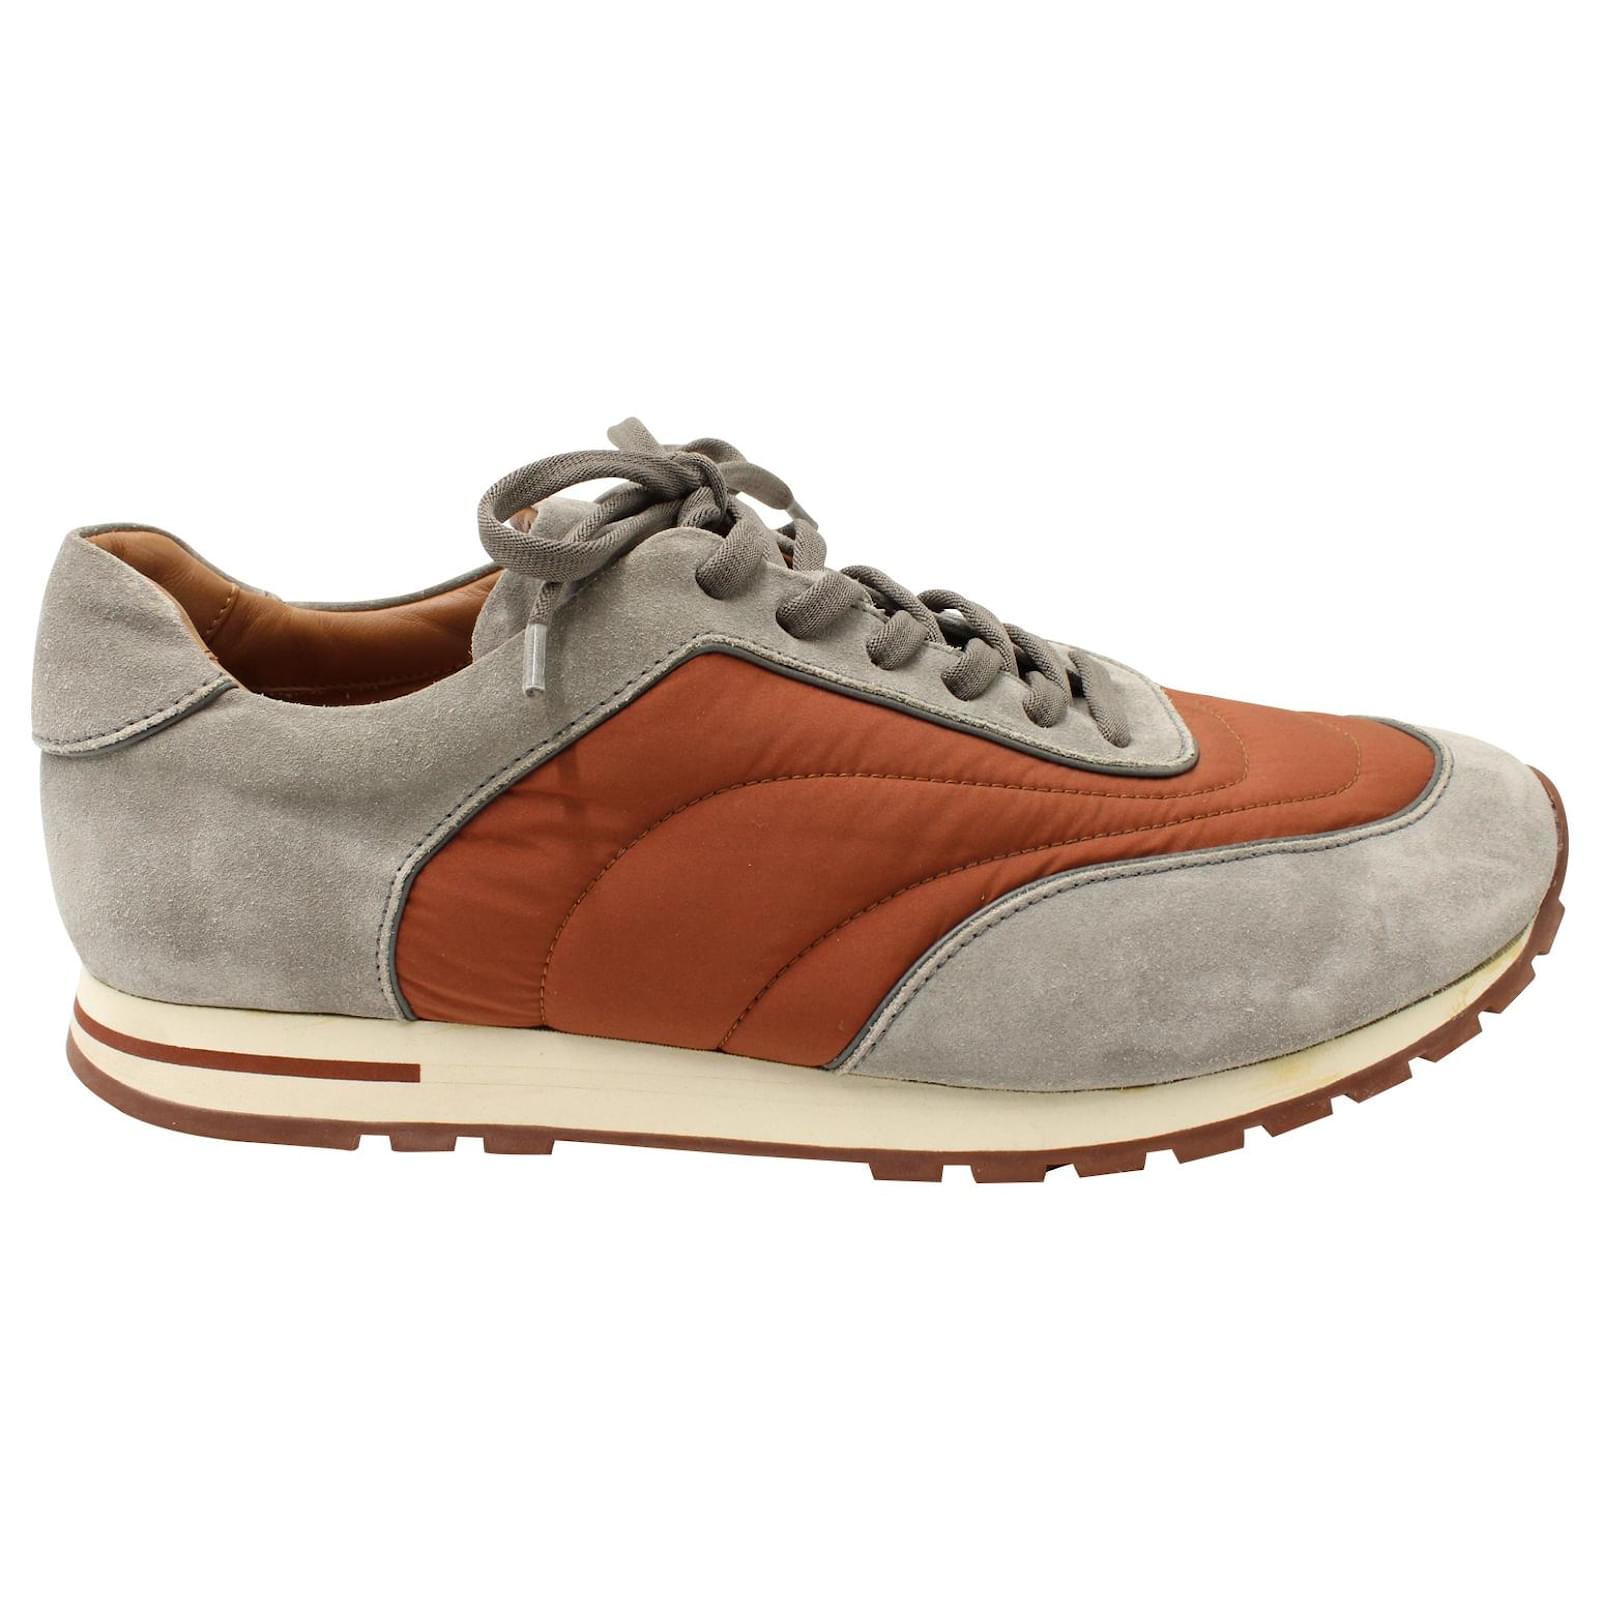 Loro Piana Weekend Walk and Wind Storm System Shell Sneakers in